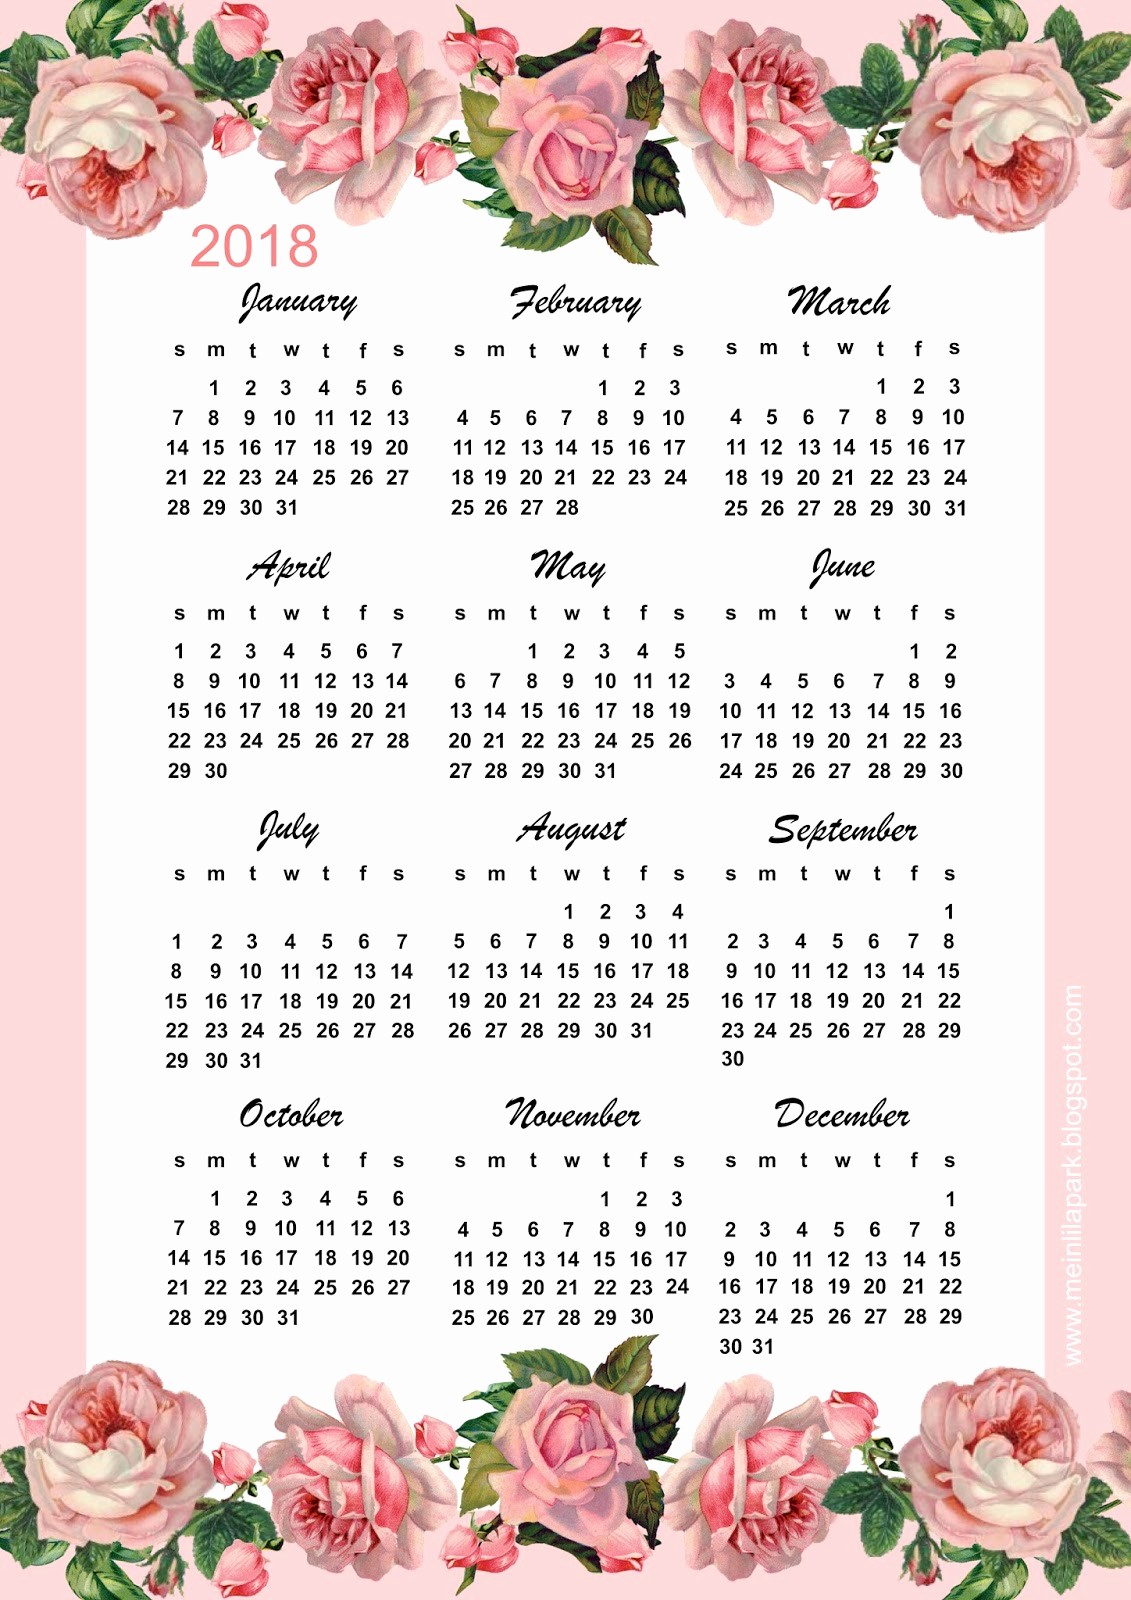 Free Printable Yearly Calendar 2018 Awesome Free Printable 2018 Rose Calendar – Year at A Glance